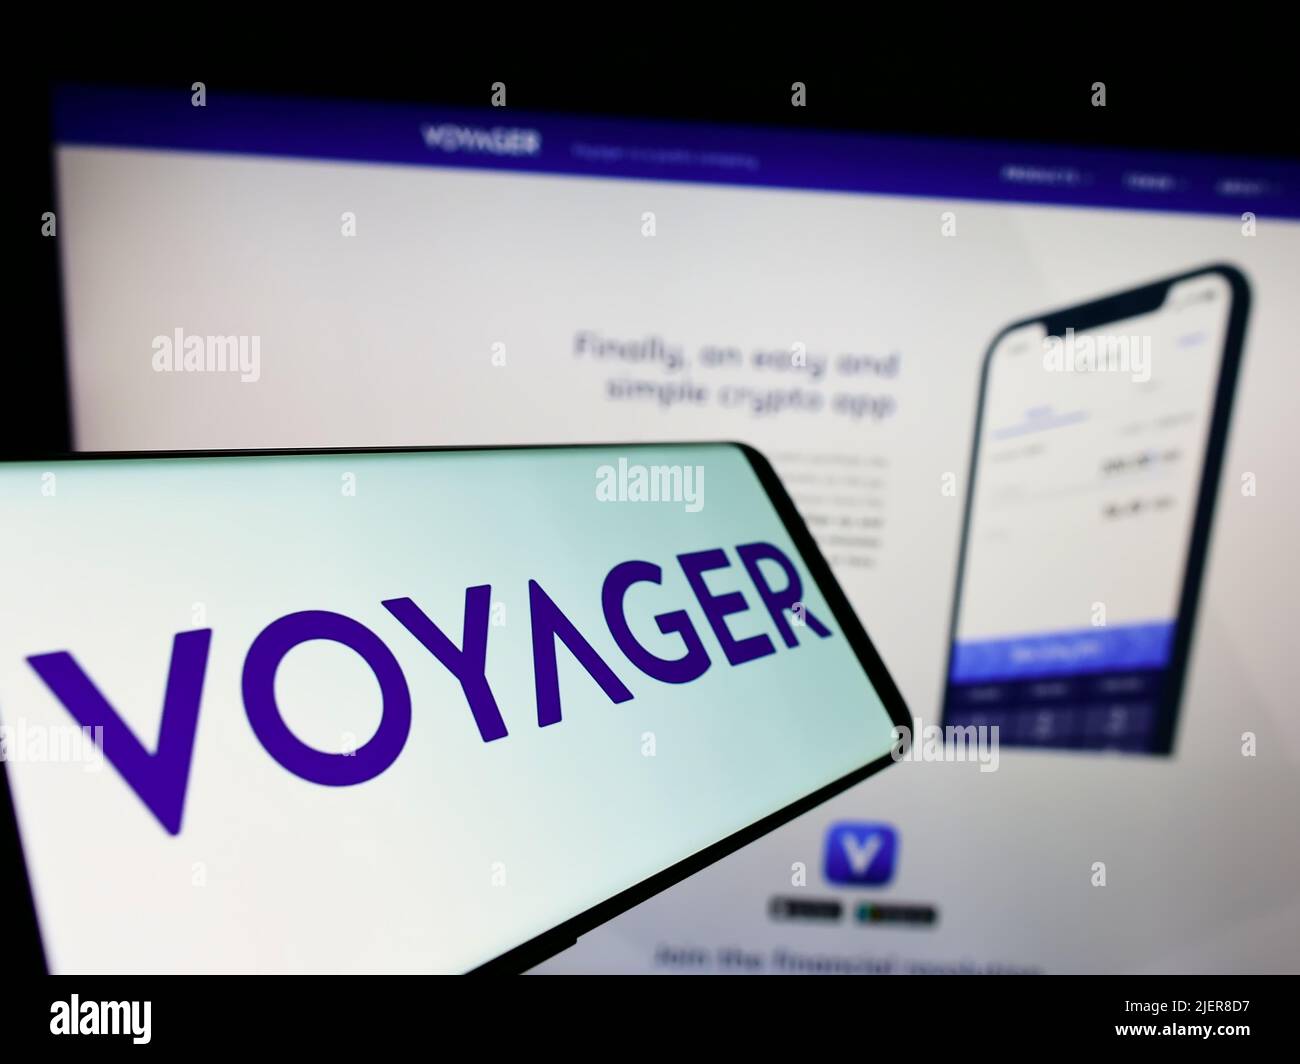 Mobile phone with logo of US cryptocurrency company Voyager Digital LLC on screen in front of business website. Focus on center of phone display. Stock Photo